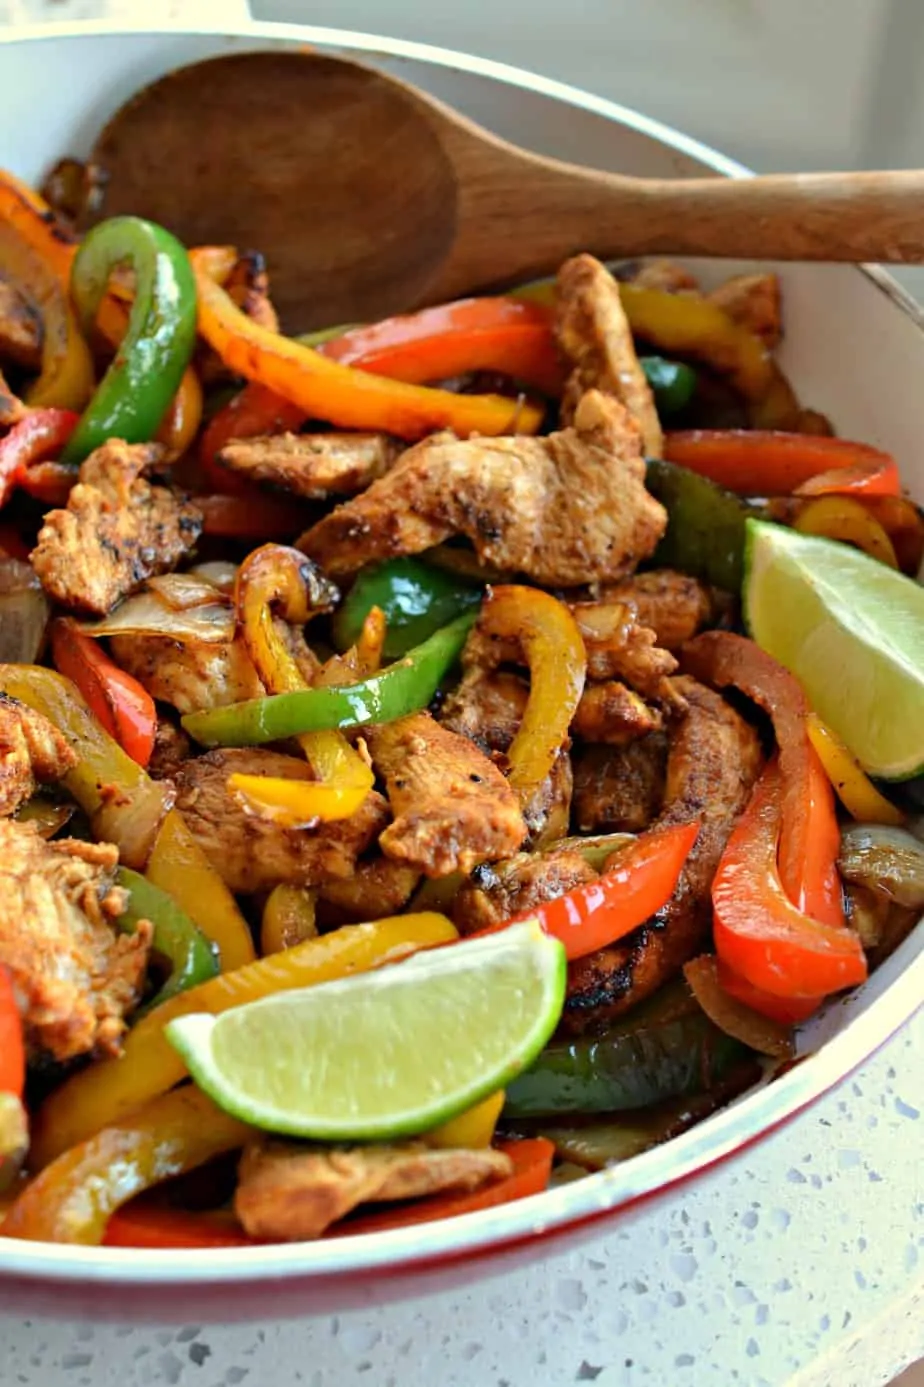 These Easy Chicken Fajitas are bursting with plenty of flavor from chili powder, garlic, smoked paprika and cumin, 